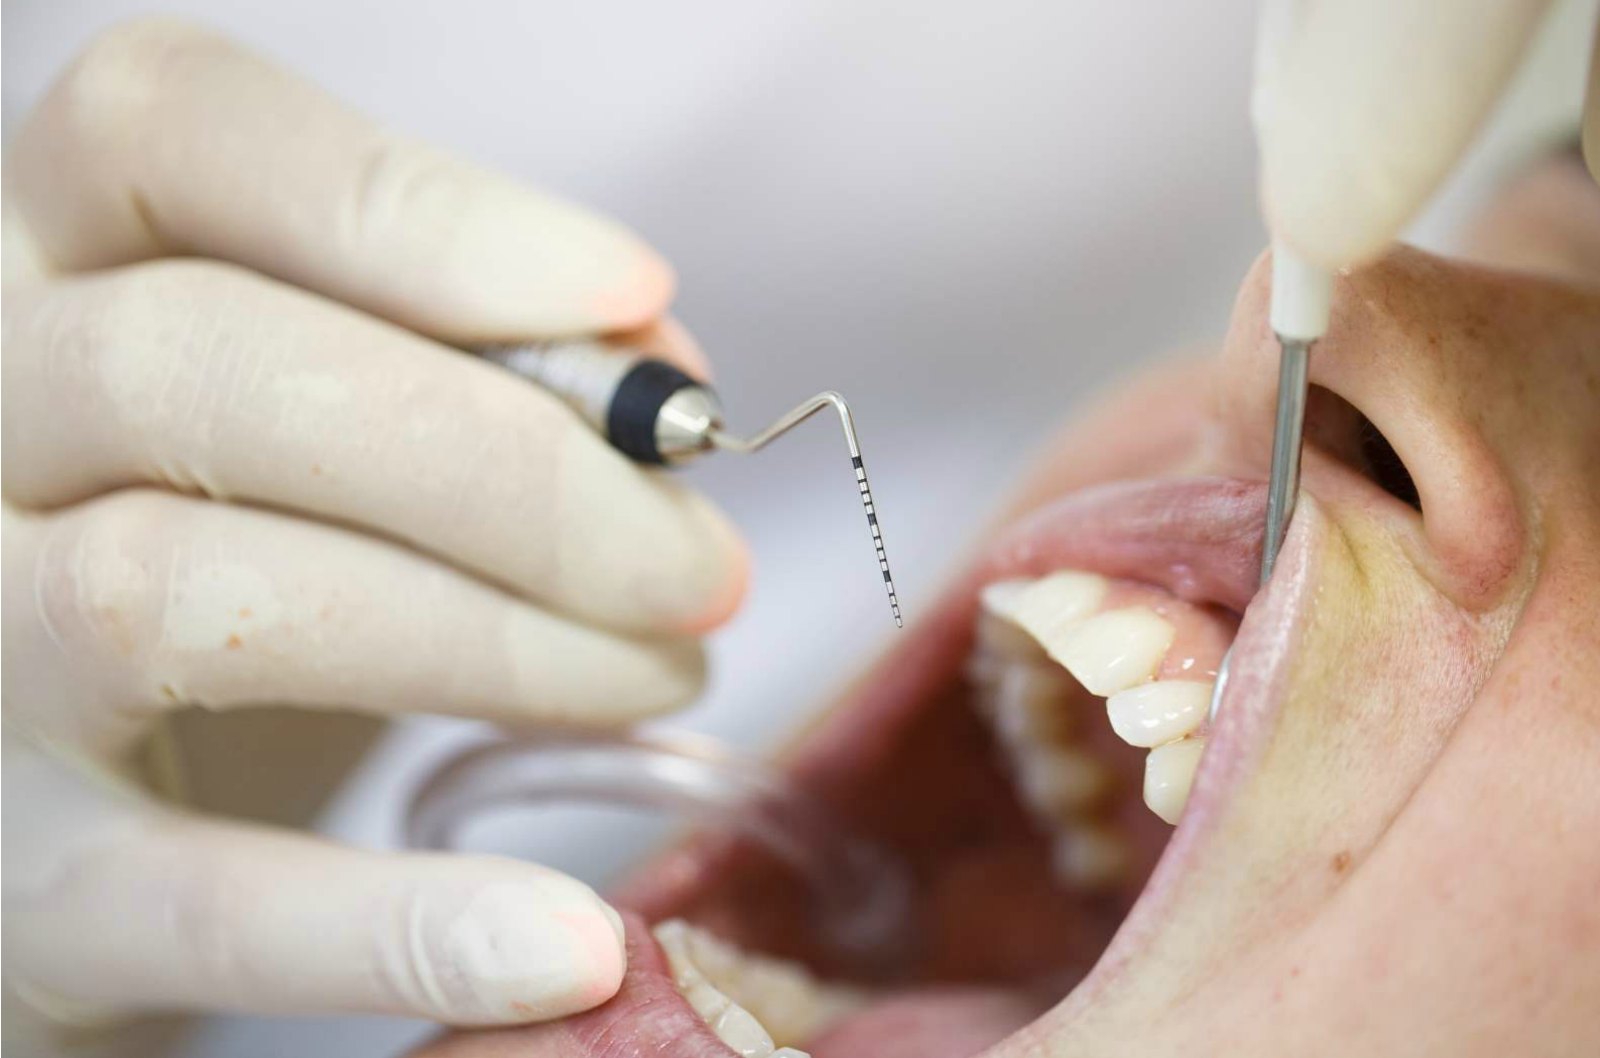 Dental Research Yields Powerful Product in the Fight Against Periodontal Disease